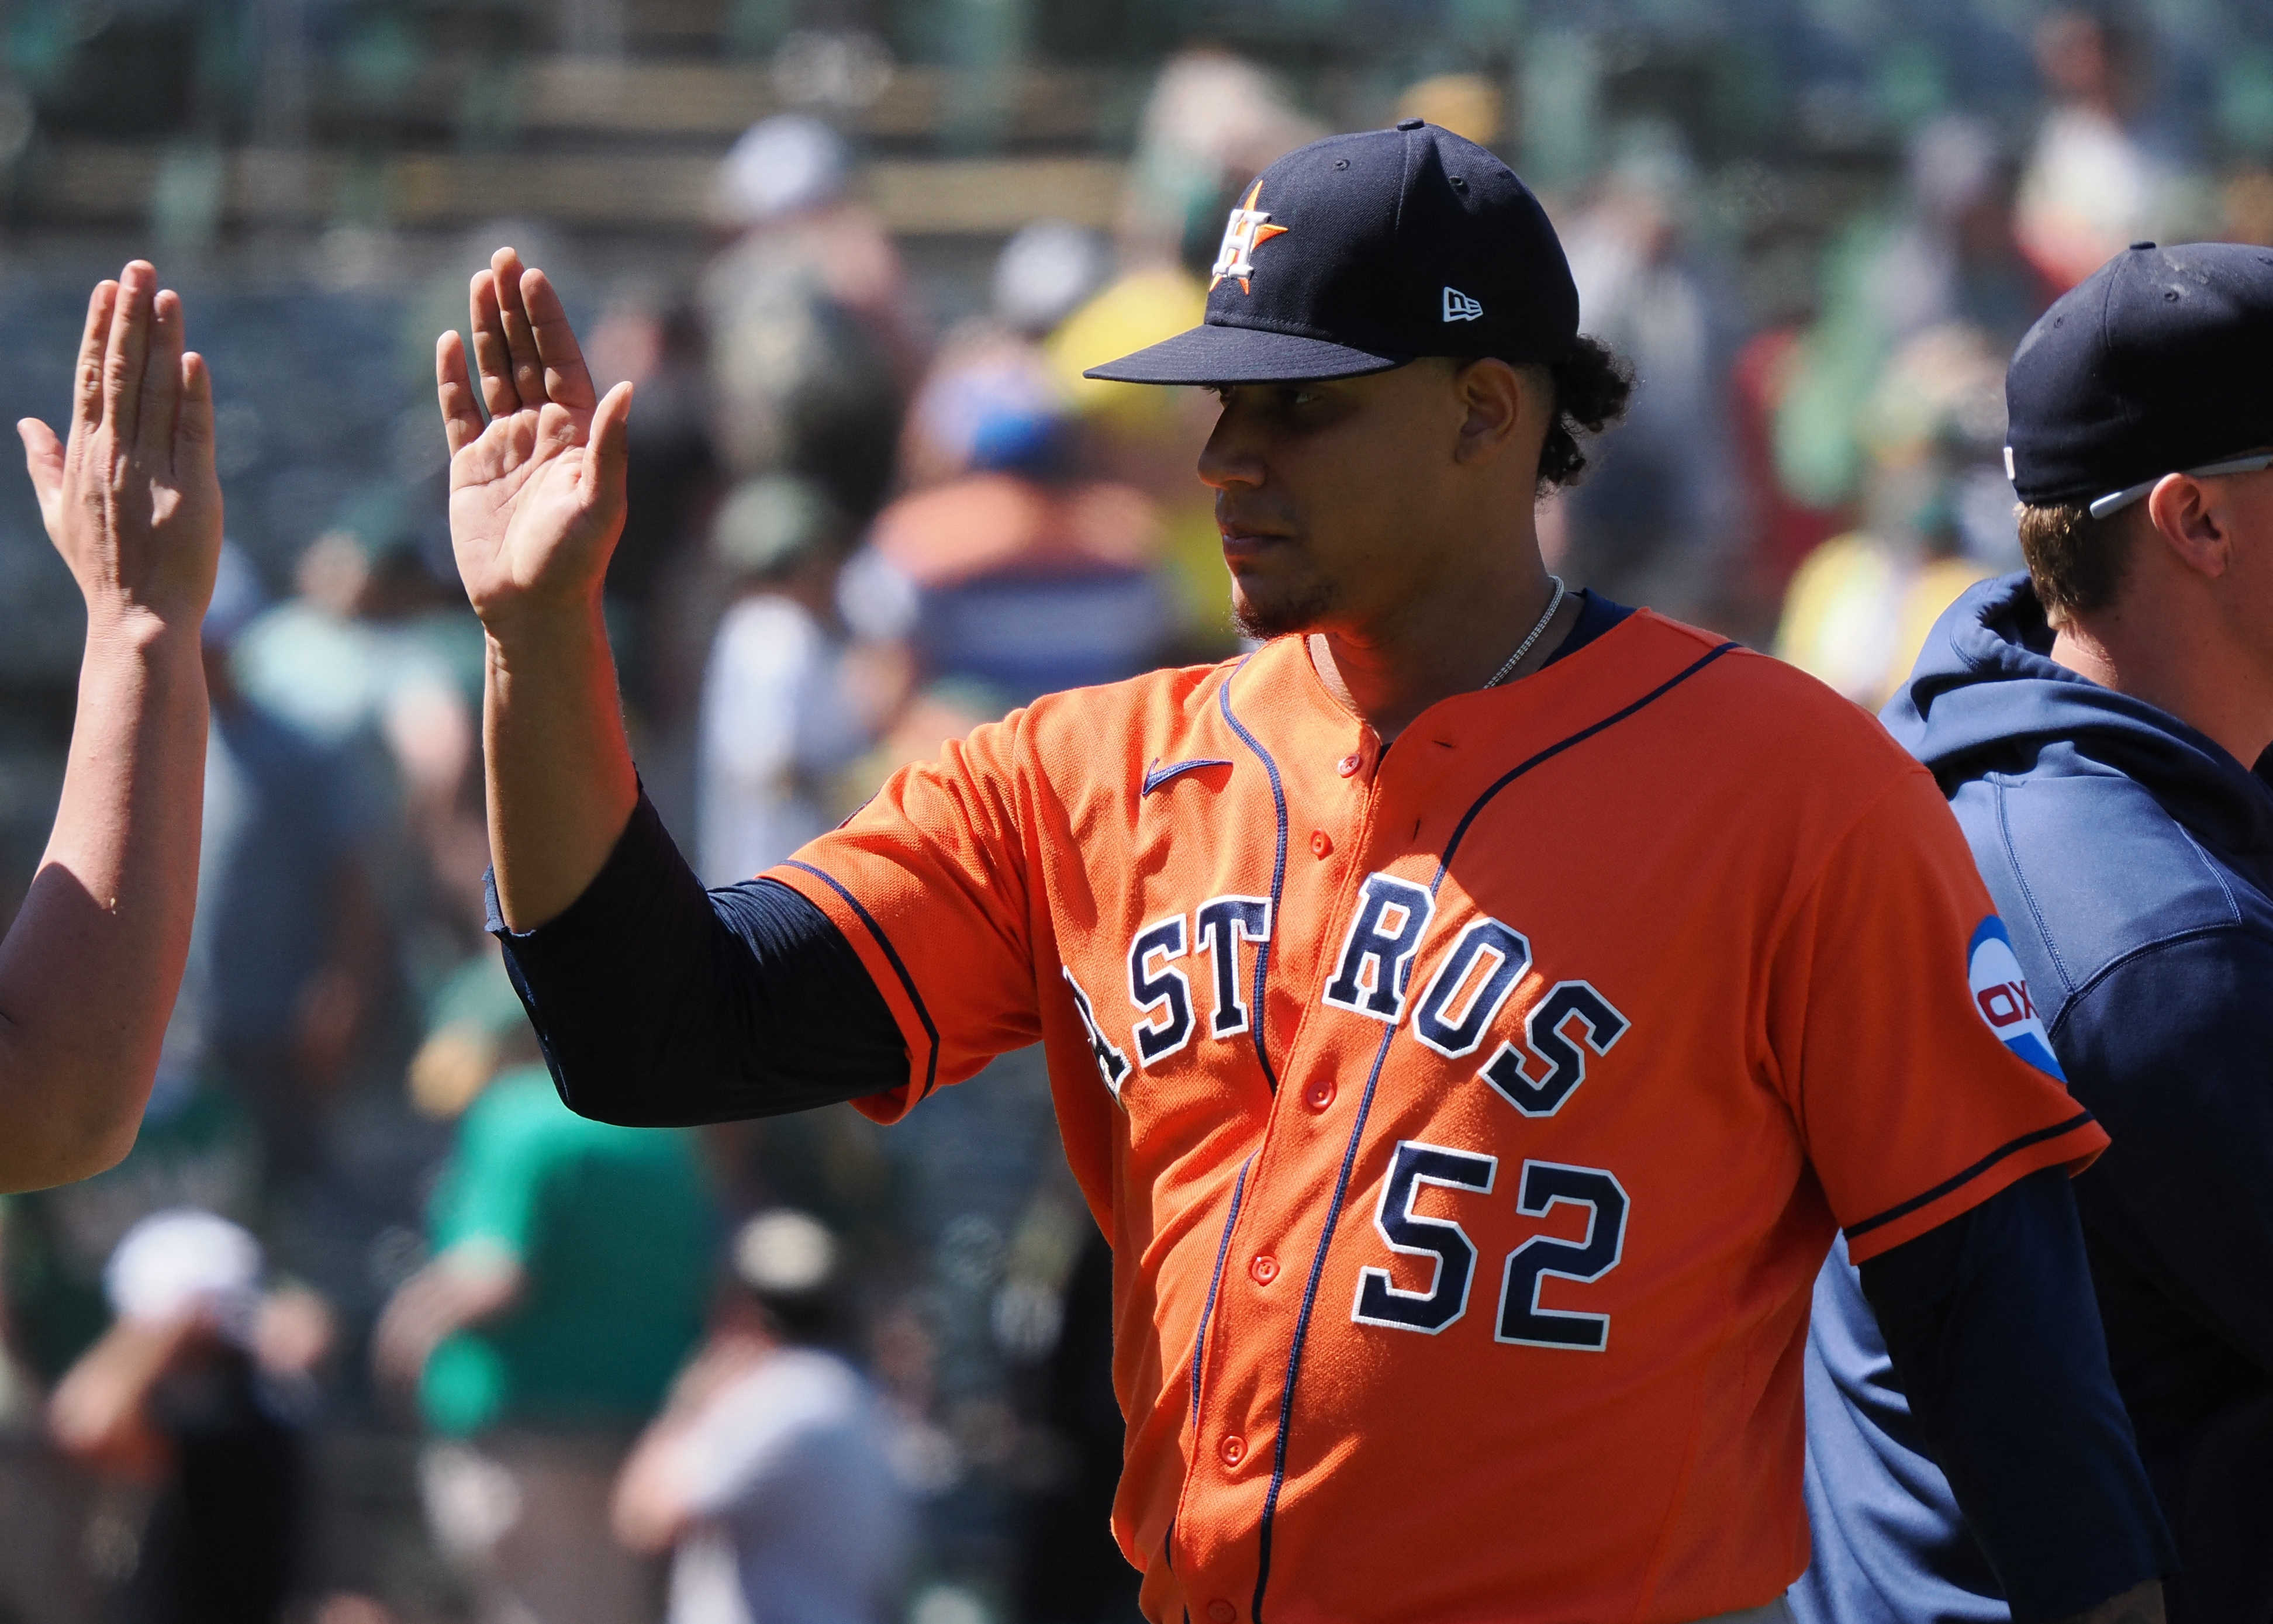 Mauricio Dubón homers to lift Houston Astros past Oakland A's